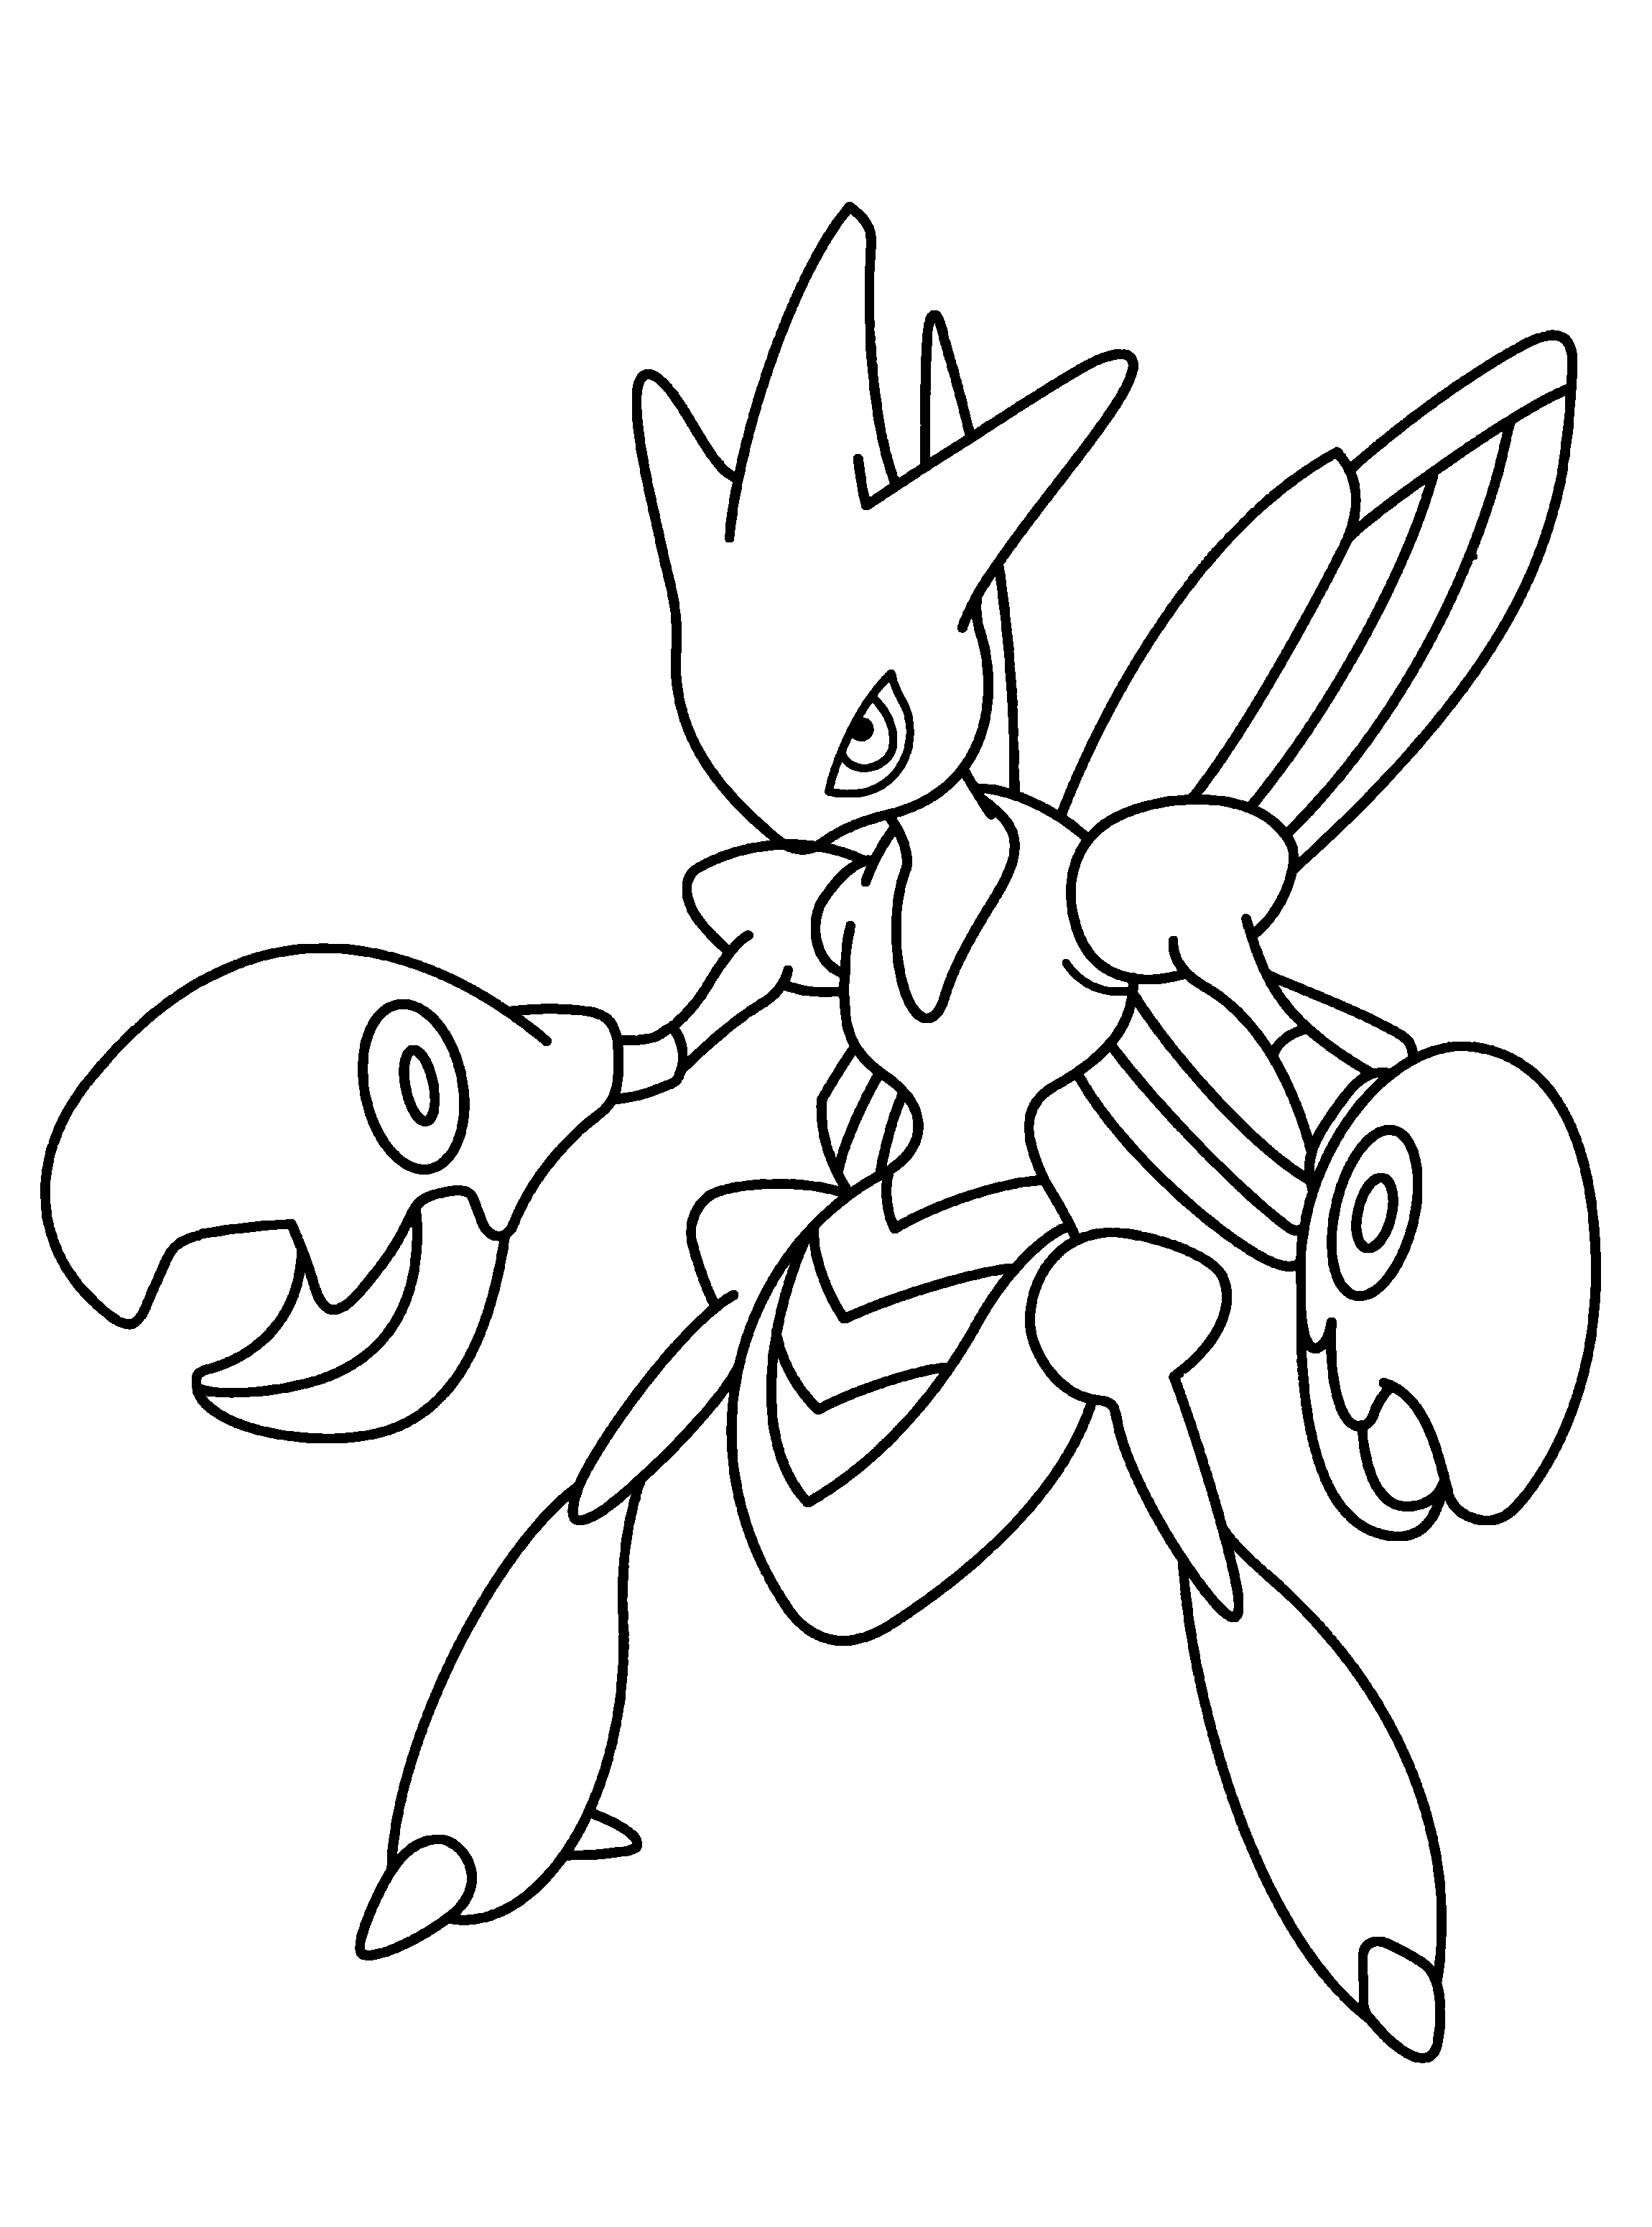 Download Pokemon Coloring Page Tv Series Coloring Page | PicGifs.com